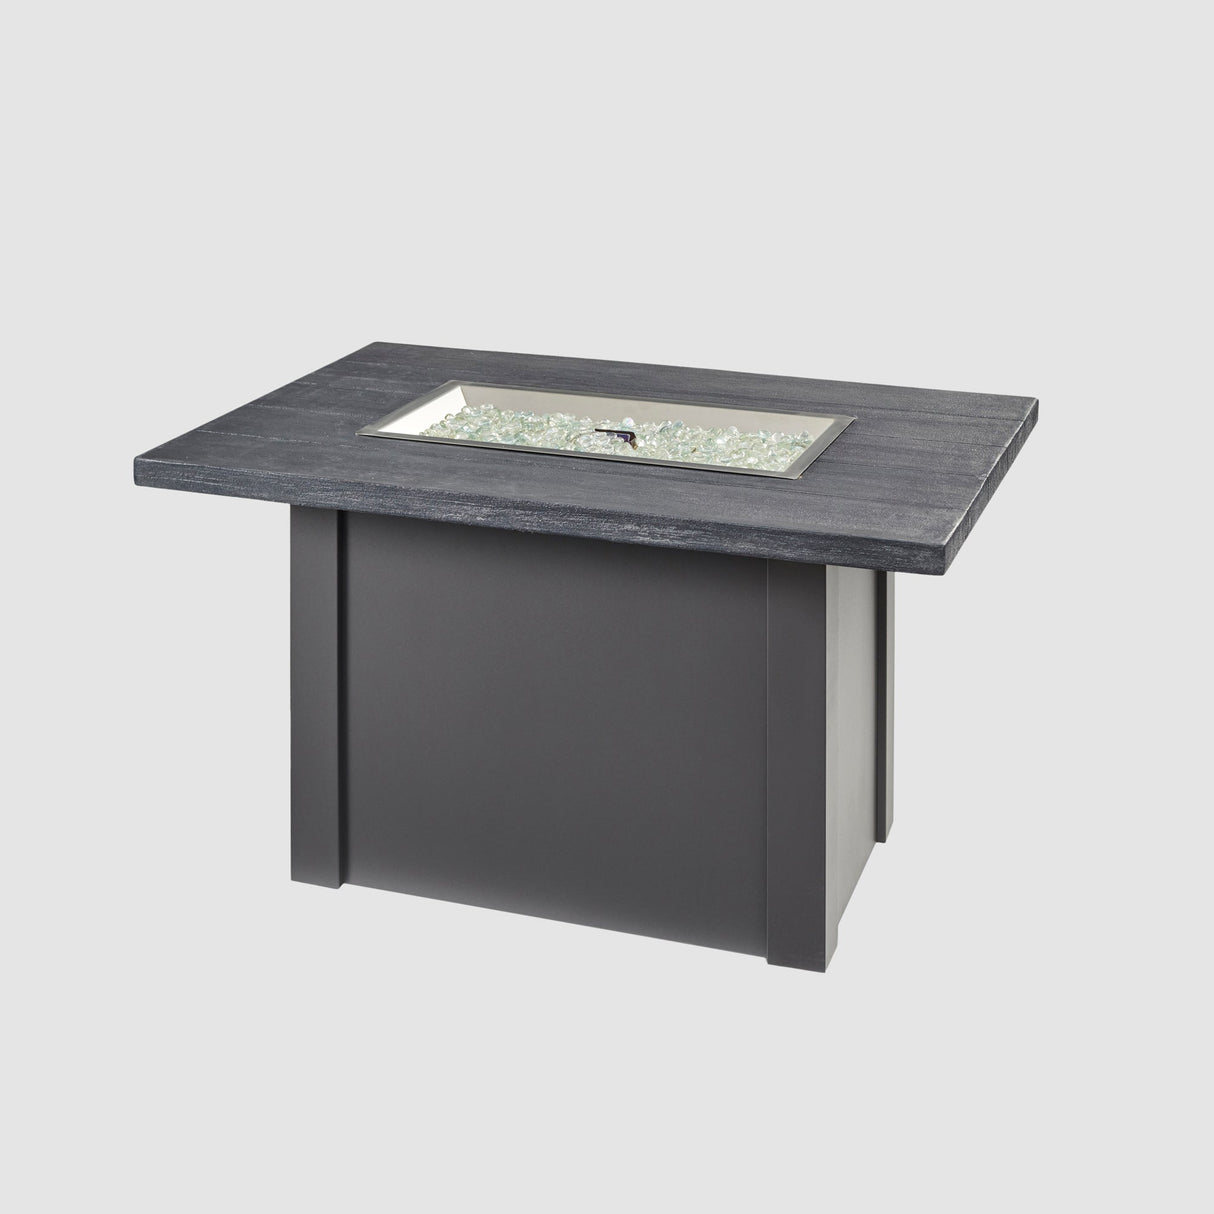 Fire media placed on the burner of a Havenwood Rectangular Gas Fire Pit Table with a Carbon Grey top and Graphite Grey base